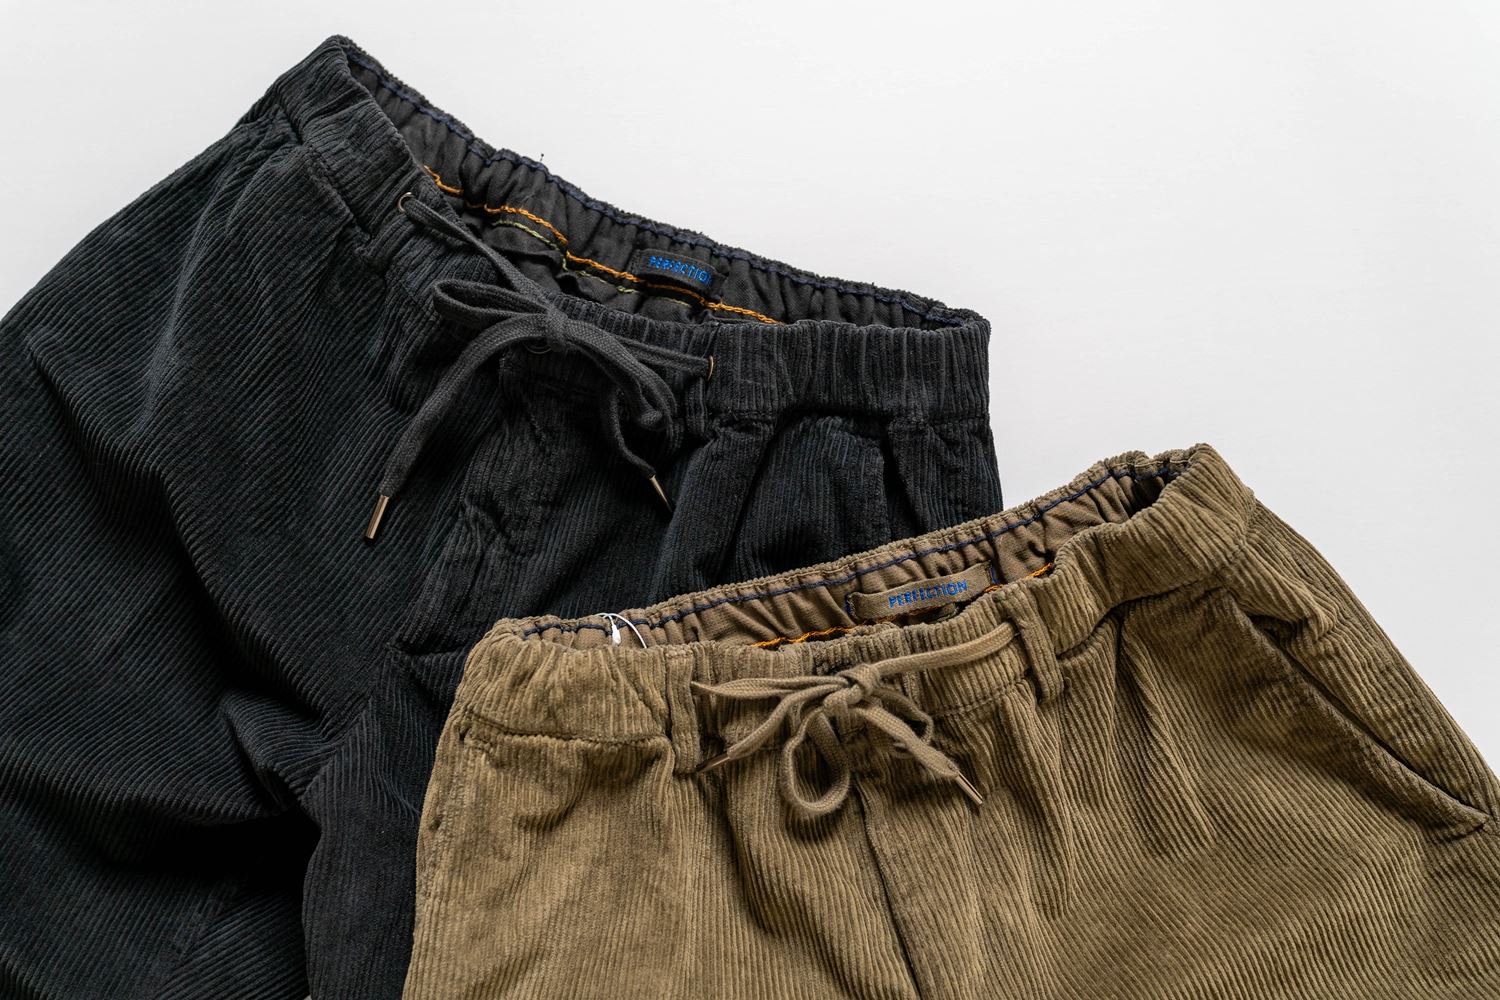 Perfection Corduroy Easy-Trousers moat | www.hurdl.org